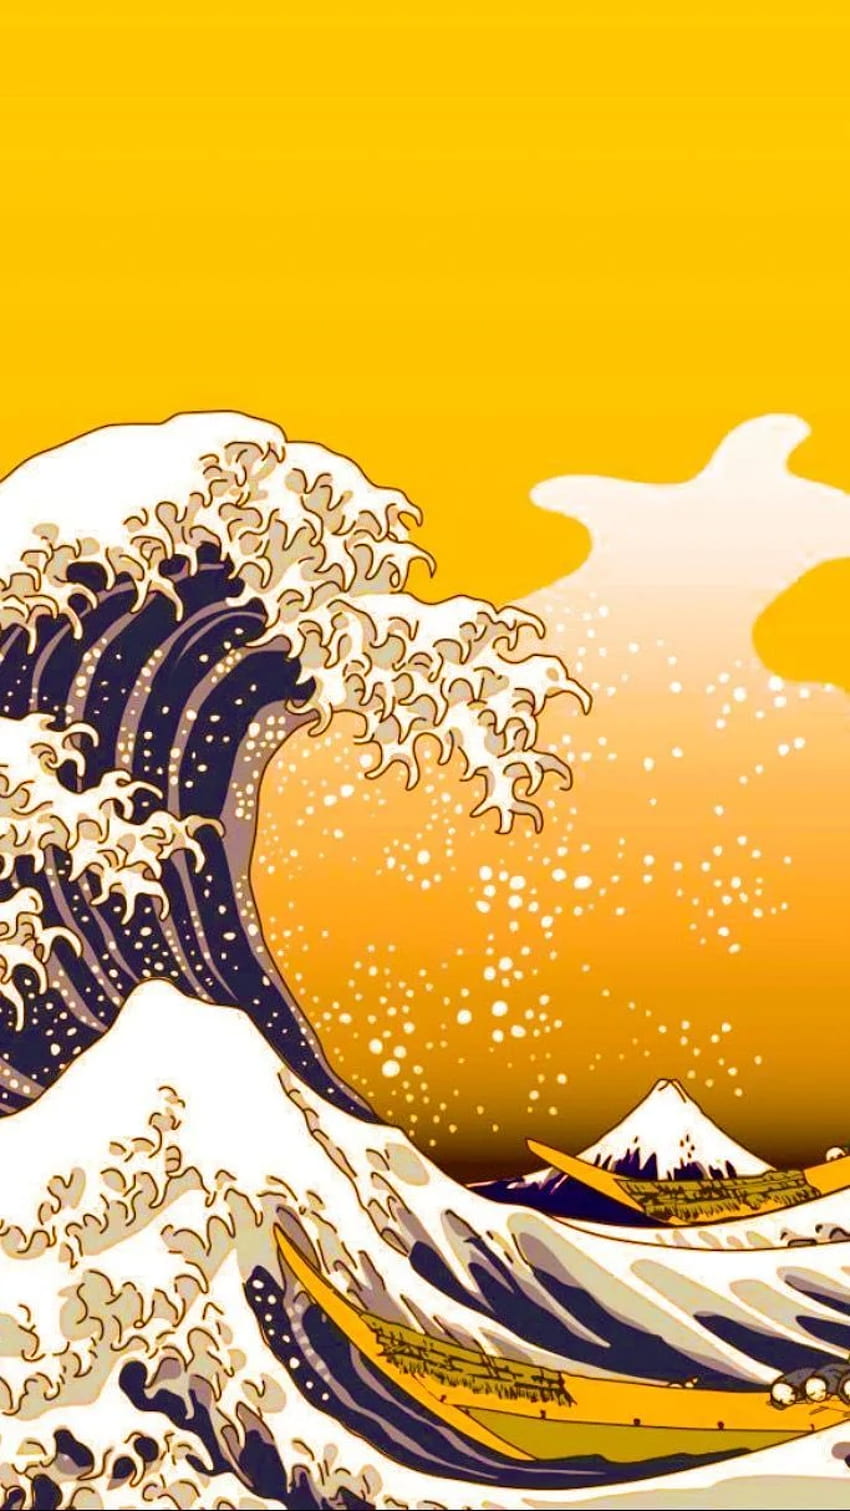 1366x768px, 720P Free download | Aesthetic Wave Japanese Vintage Yellow ...